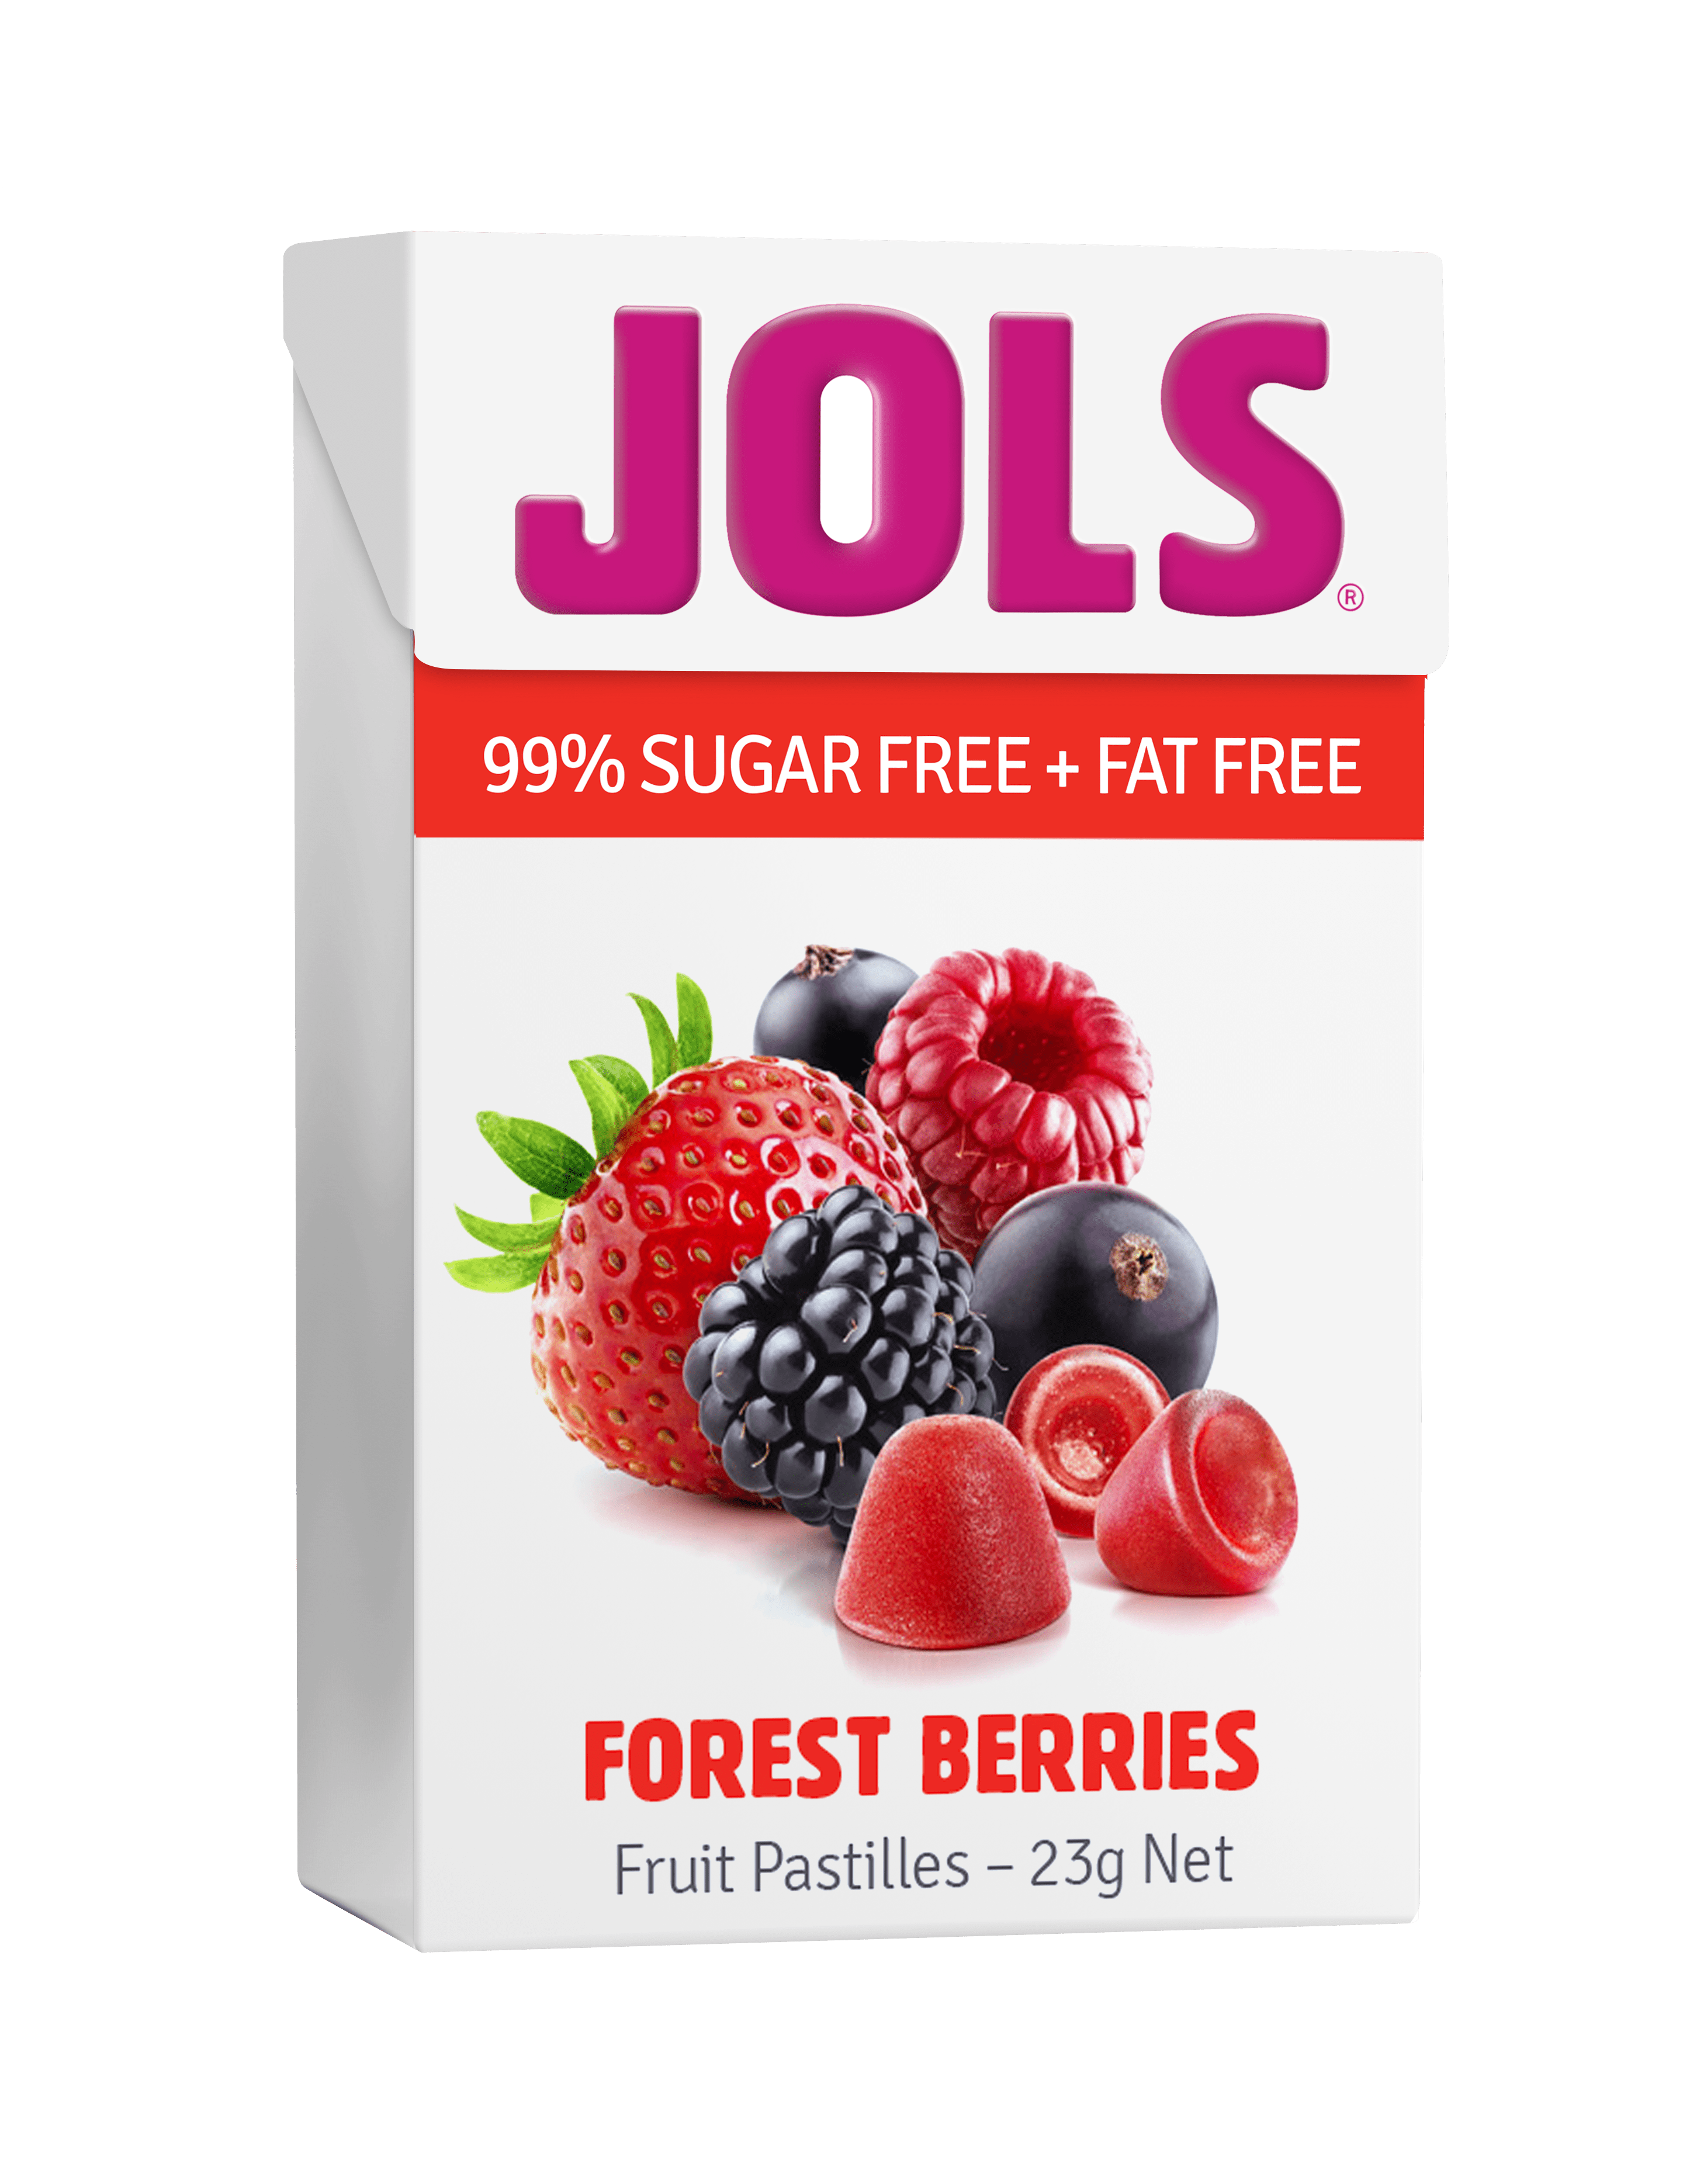 fe-1485-jols-forest-berries-for-web-min